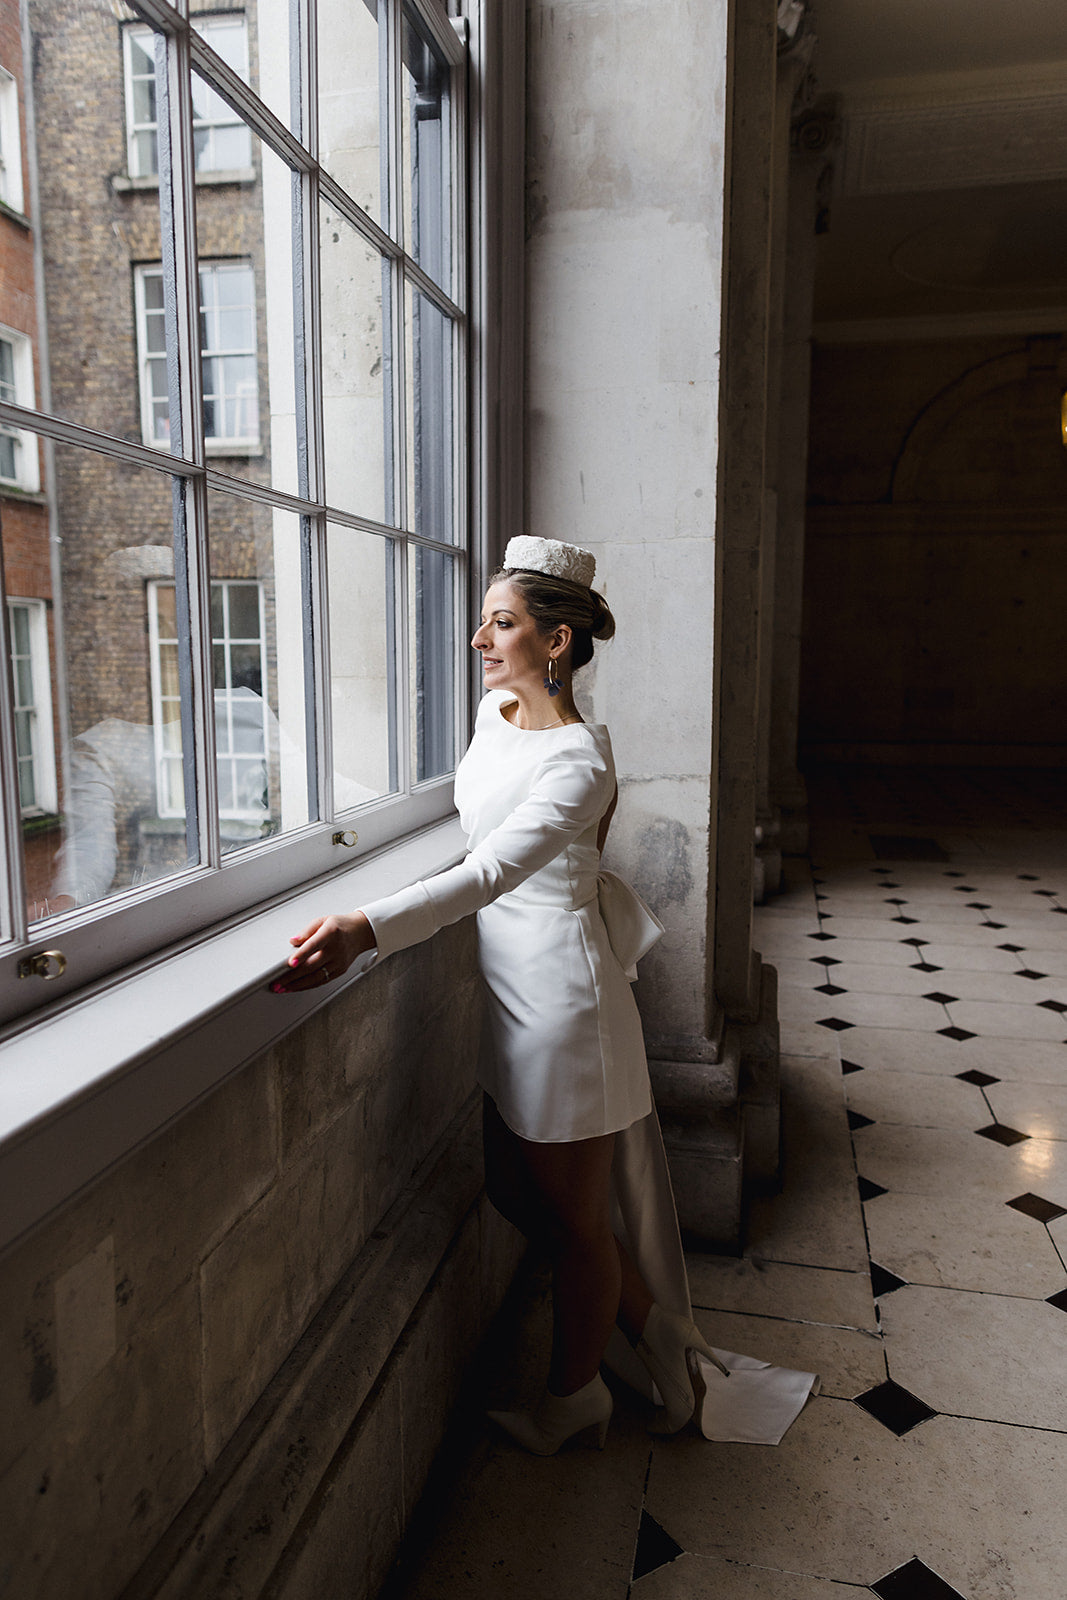 Irish Bride wears a short wedding dress with LONG SLEEVES AND STATEMENT BOW IN cORK 